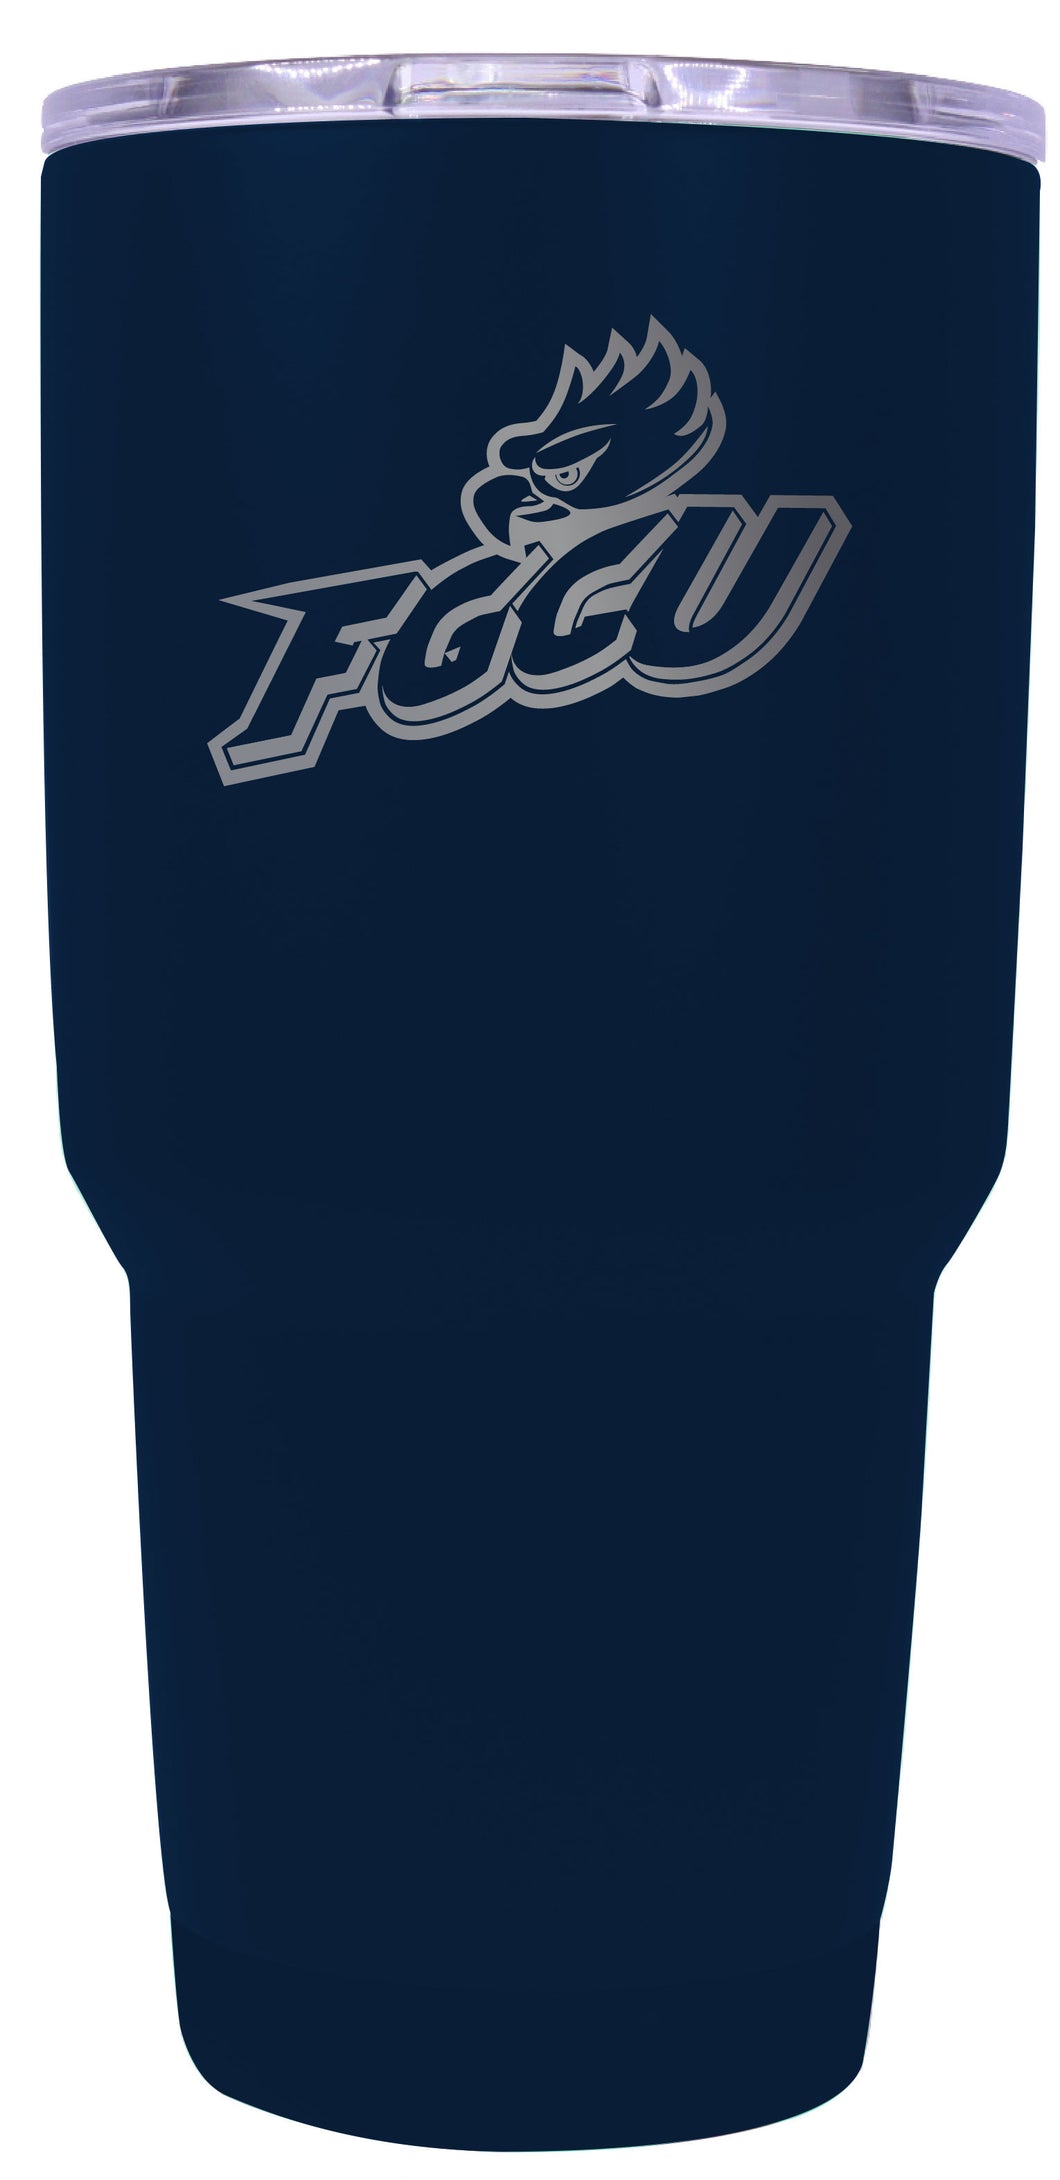 Florida Gulf Coast Eagles 24 oz Laser Engraved Stainless Steel Insulated Tumbler - Choose Your Color.